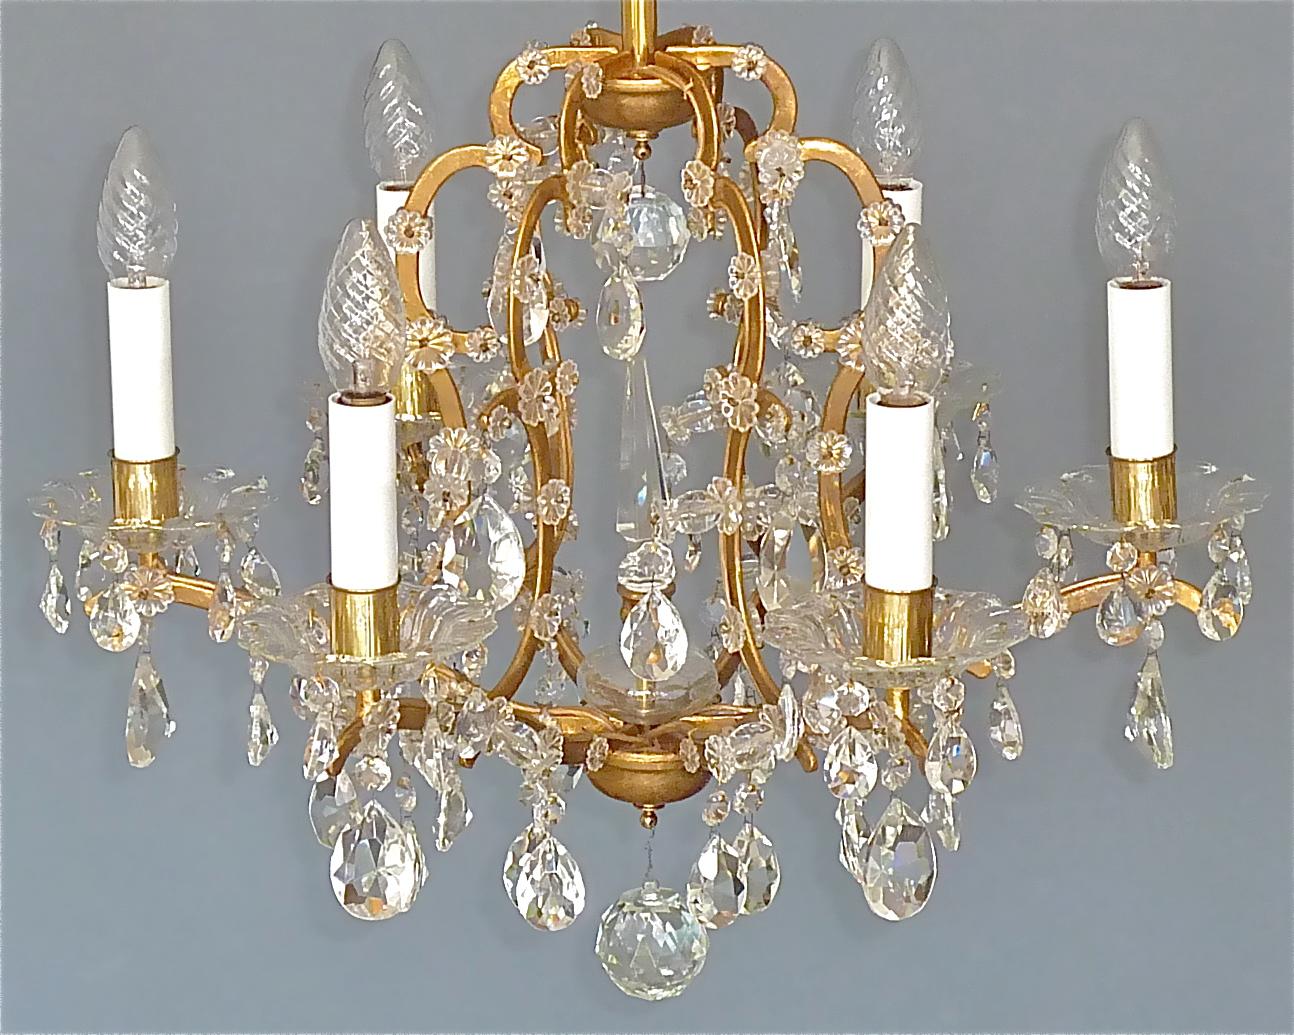 Lobmeyr Maria Theresia Style Chandelier 1950s Gilt Brass Faceted Crystal Glass For Sale 4